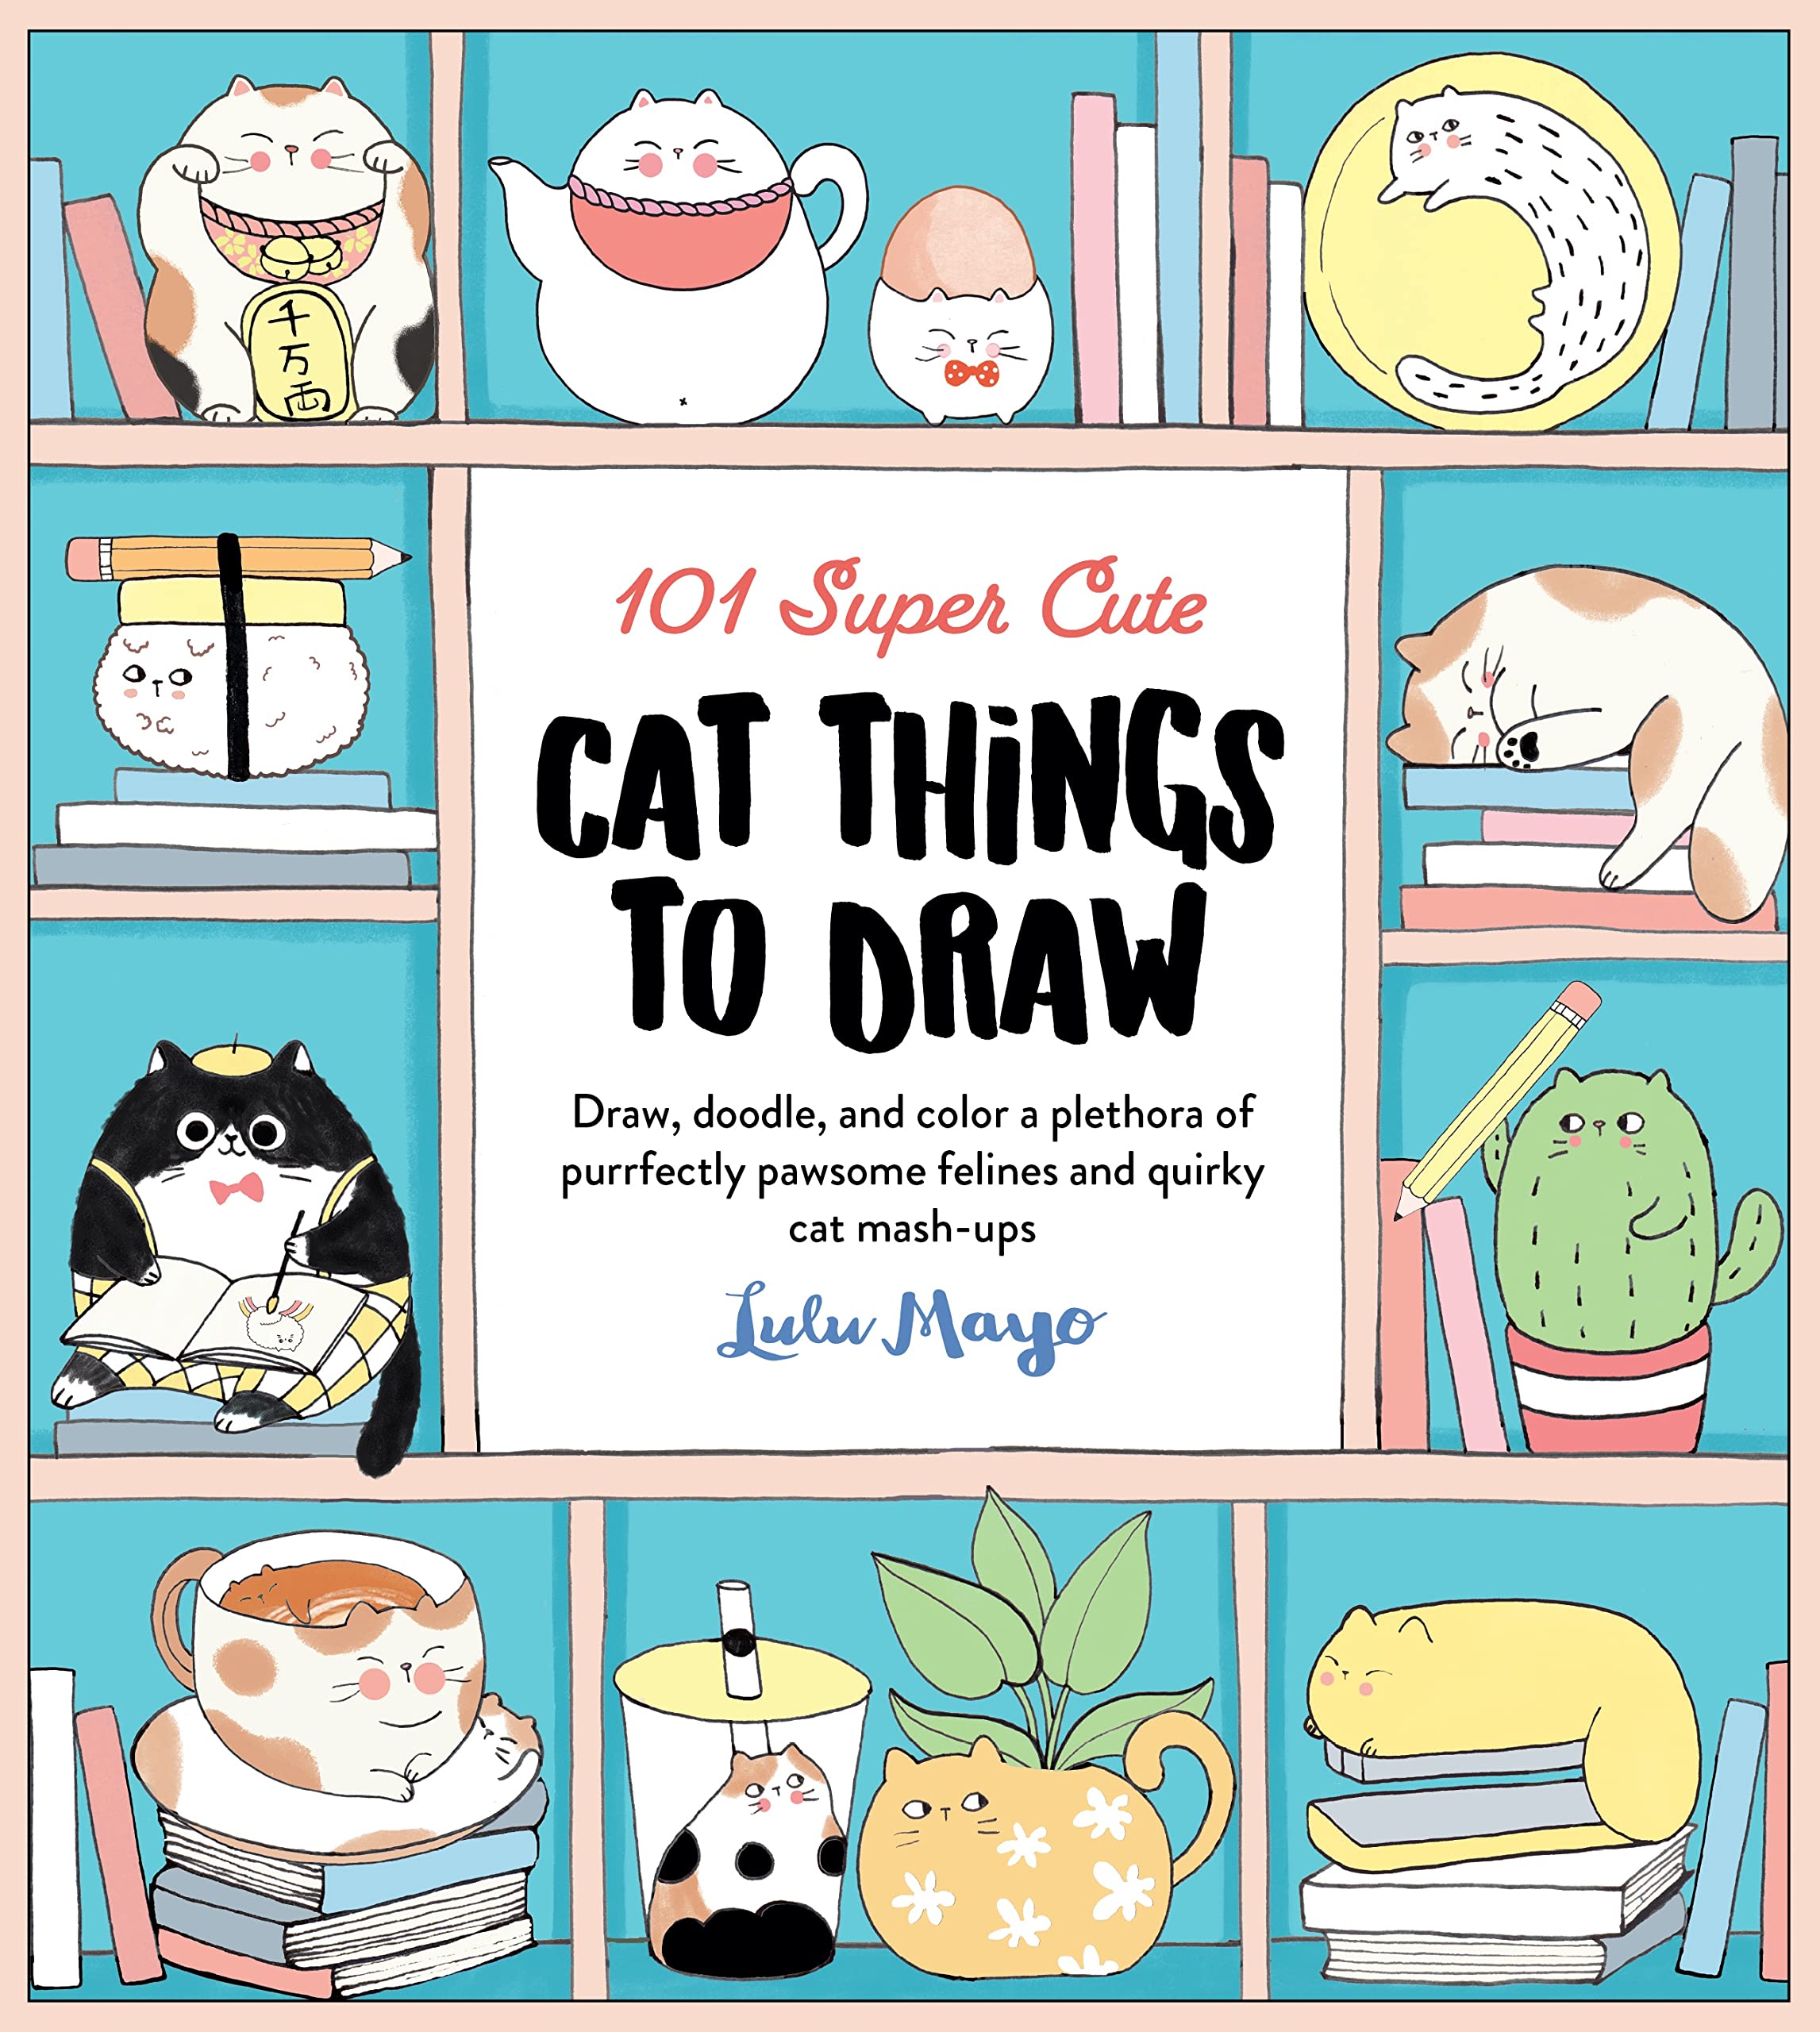 101 Super Cute Cat Things to Draw Draw, doodle, and color a plethora